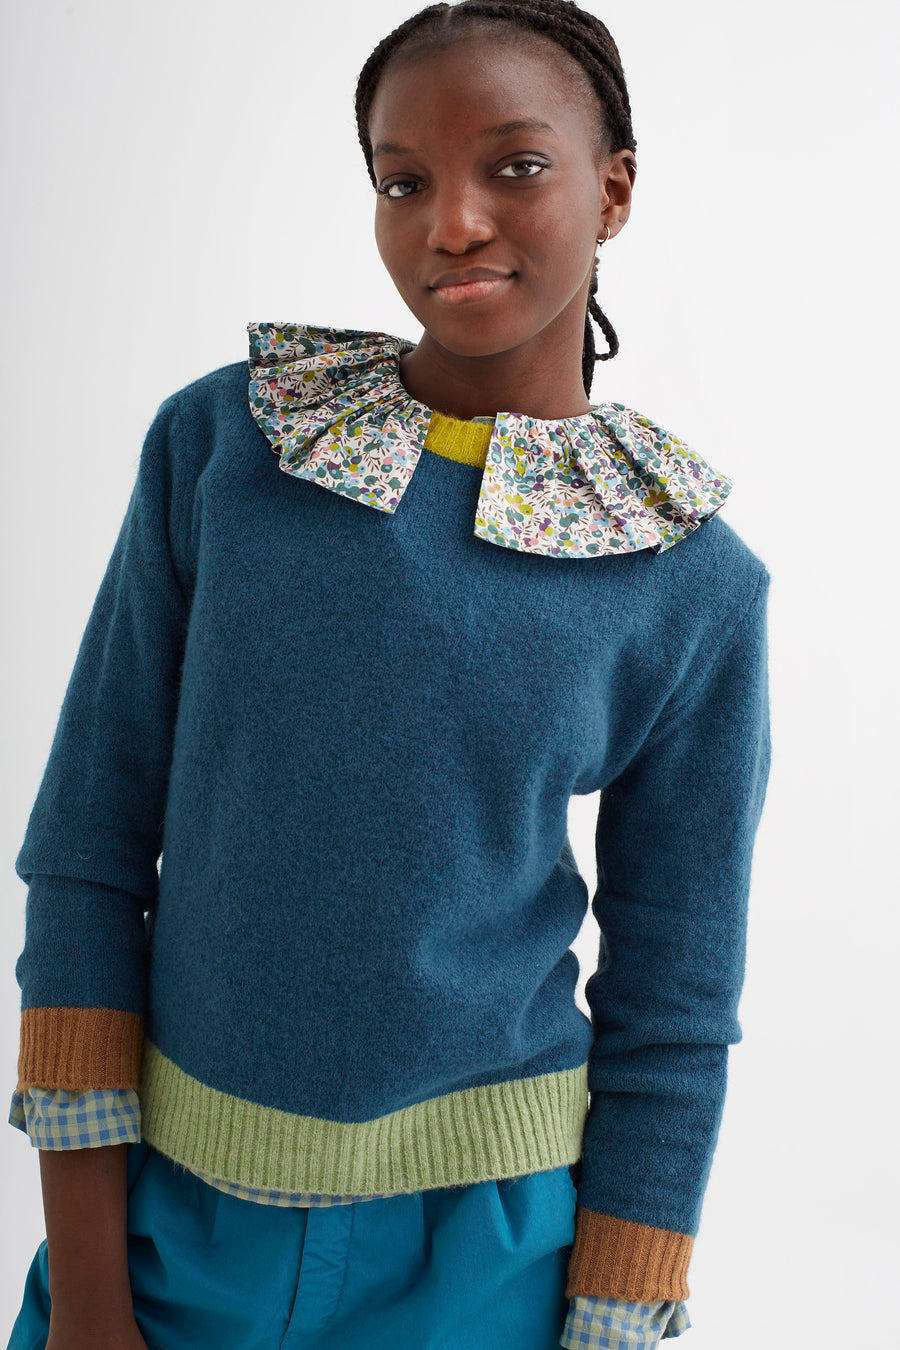 Turquoise Funcky Sweater